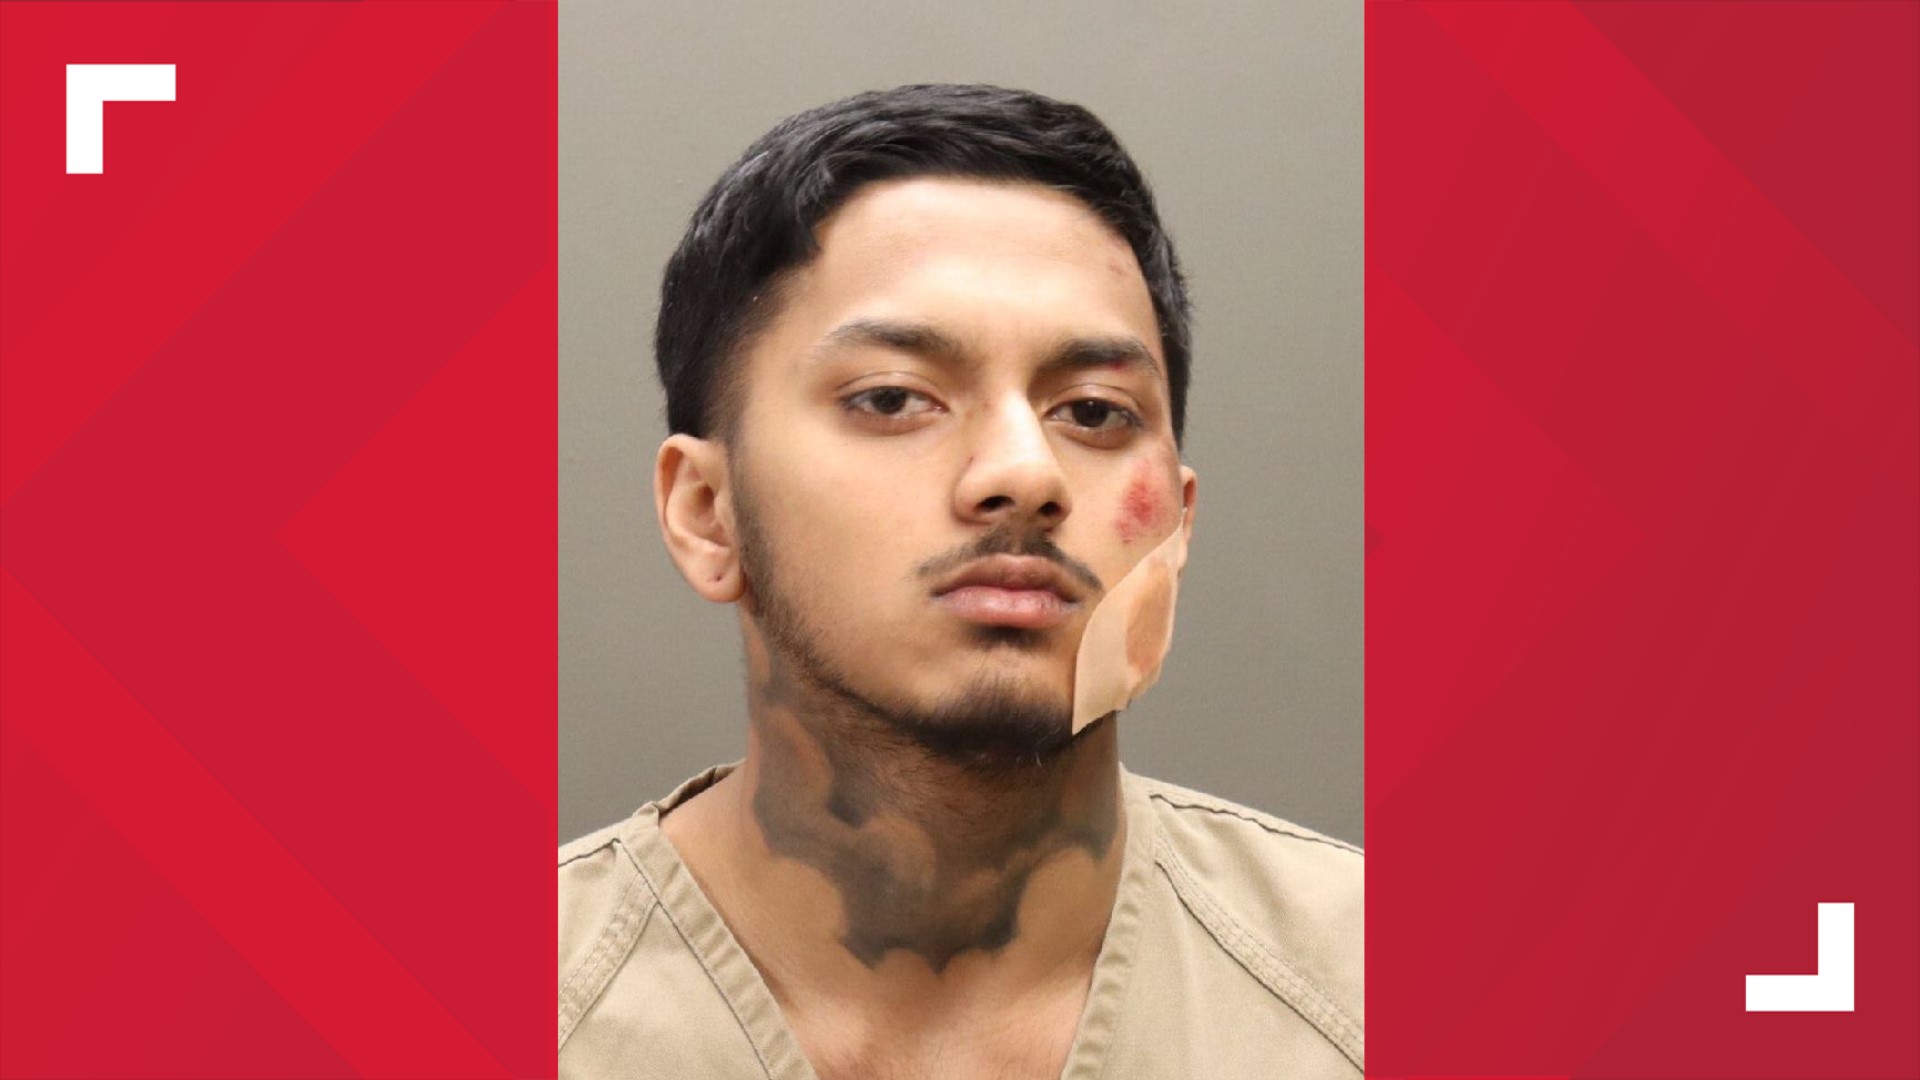 Court records state that Sabab Islam, 20, punched the officer several times during a traffic stop on I-670 at Grandview Avenue Saturday morning.